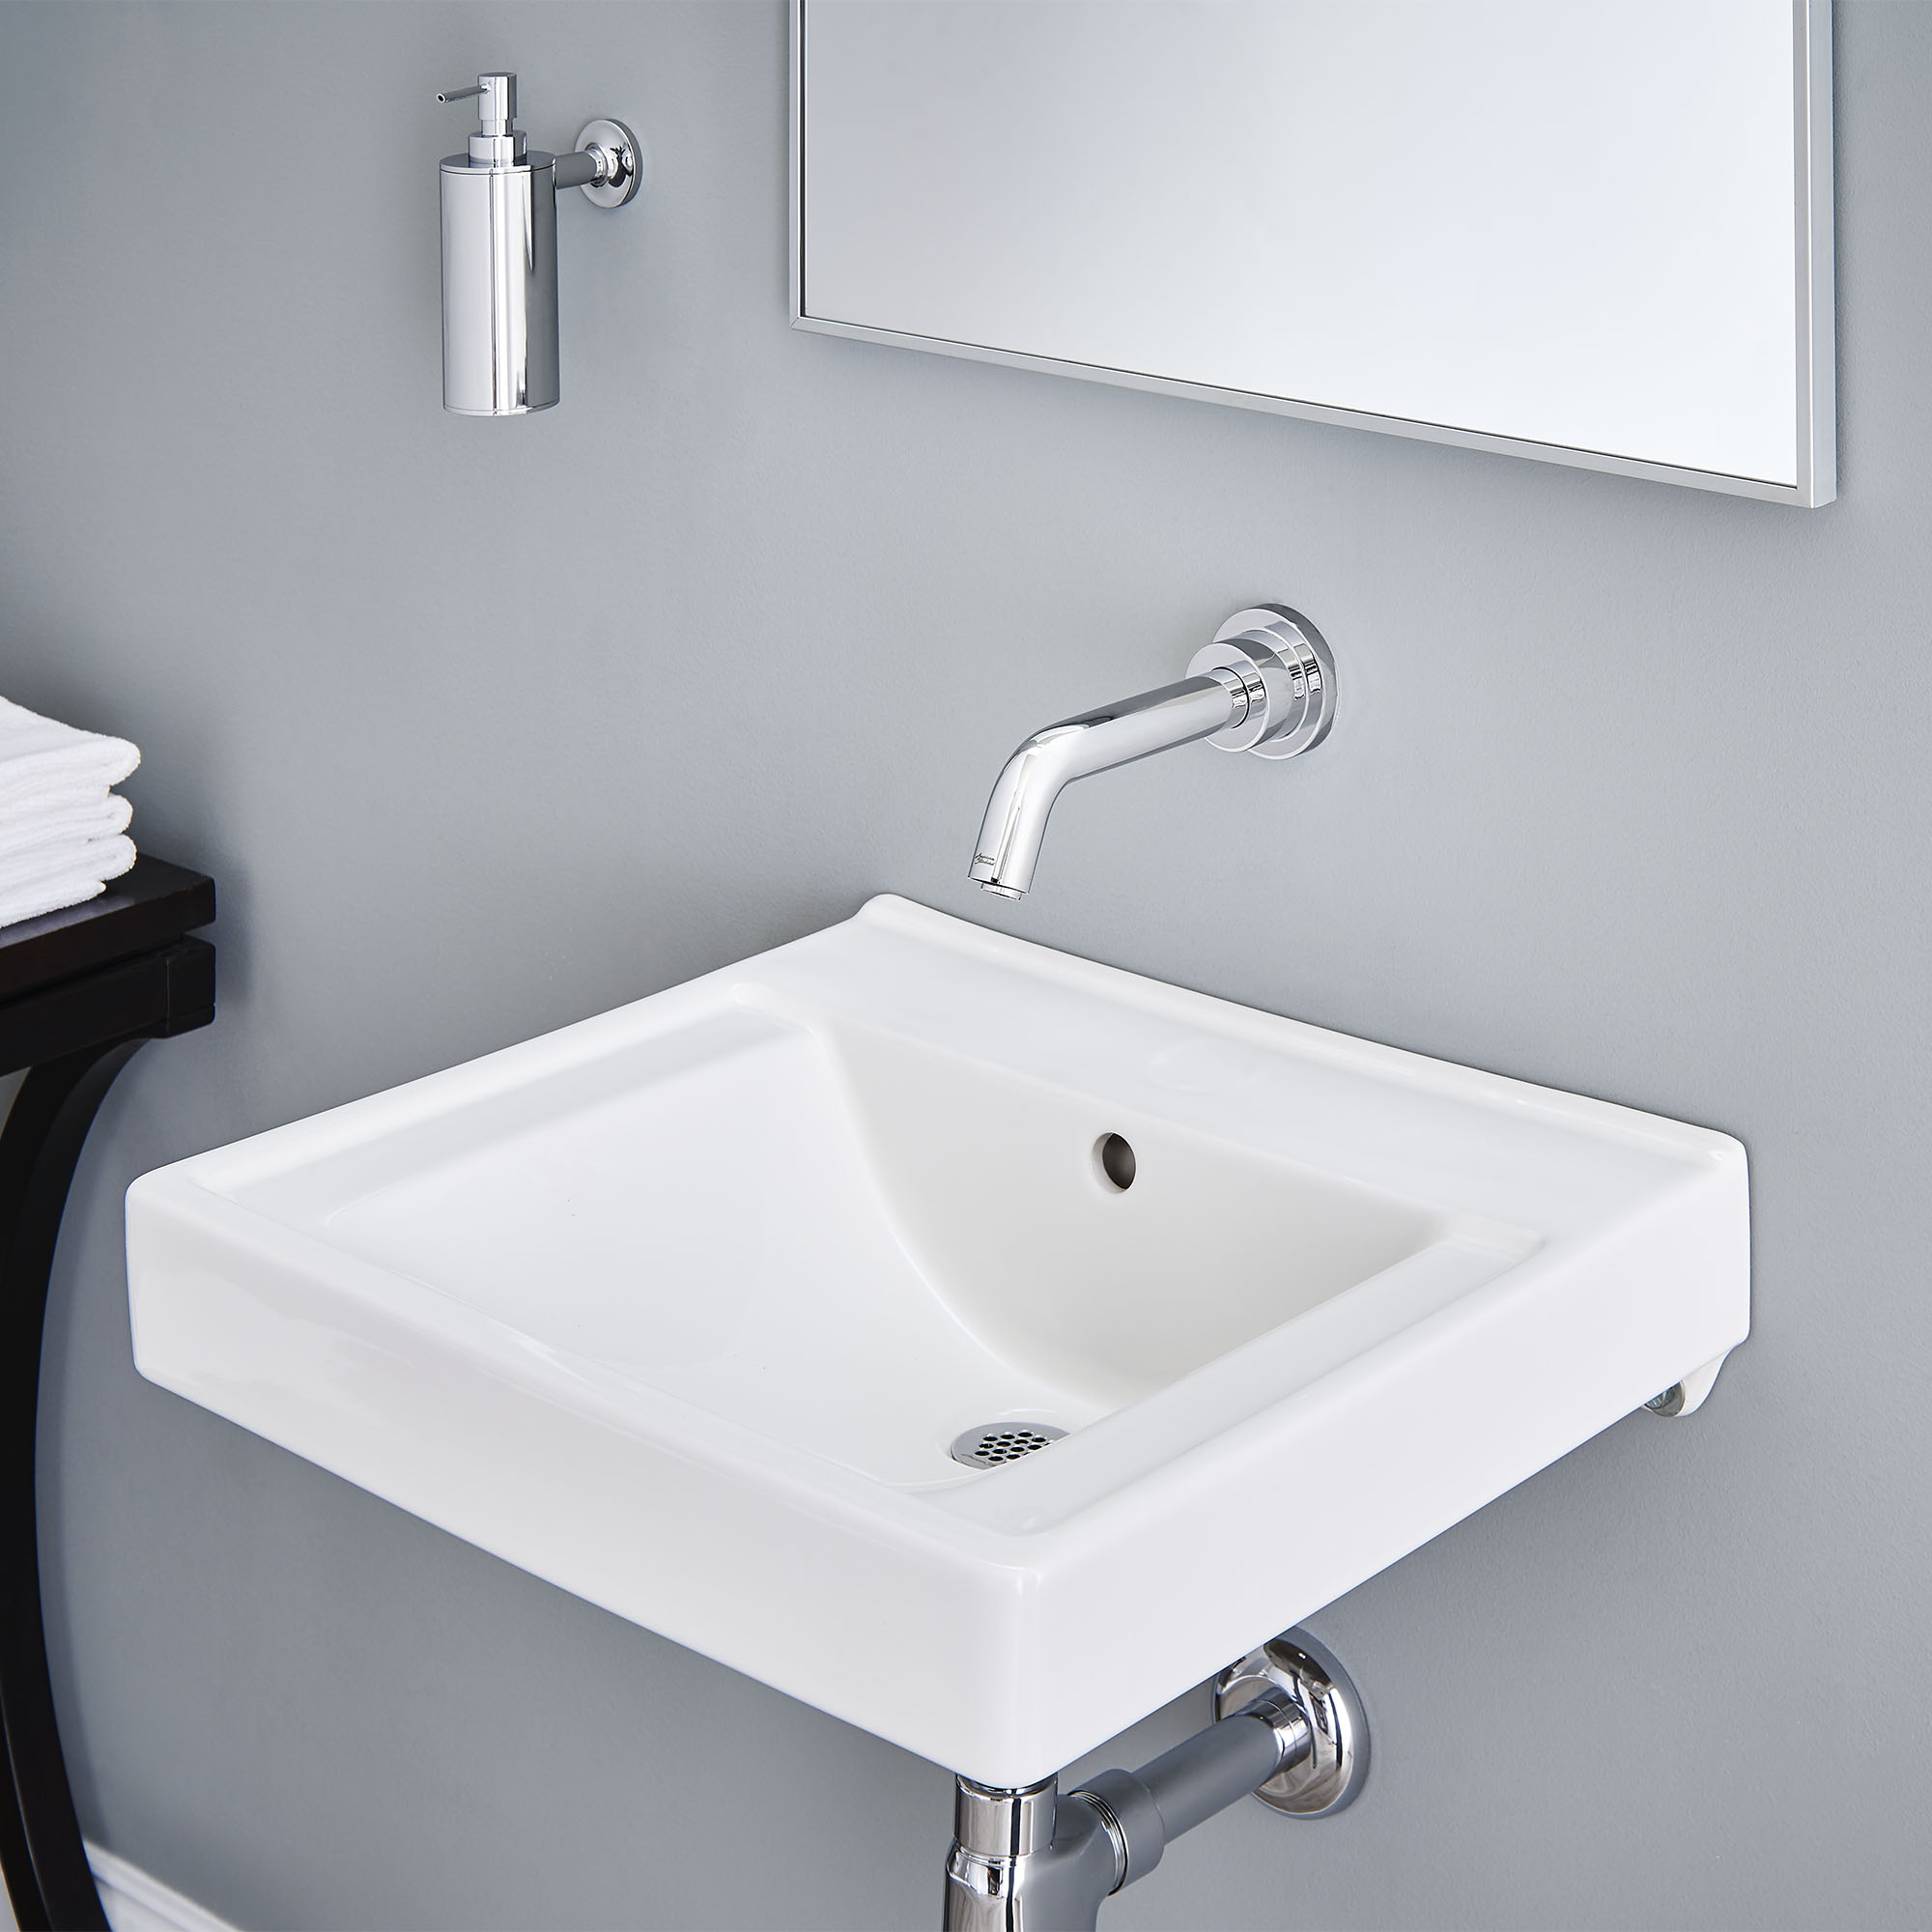 Serin™ Touchless Wall-Mount Trim, Battery-Powered, 0.35 gpm/1.3 Lpm